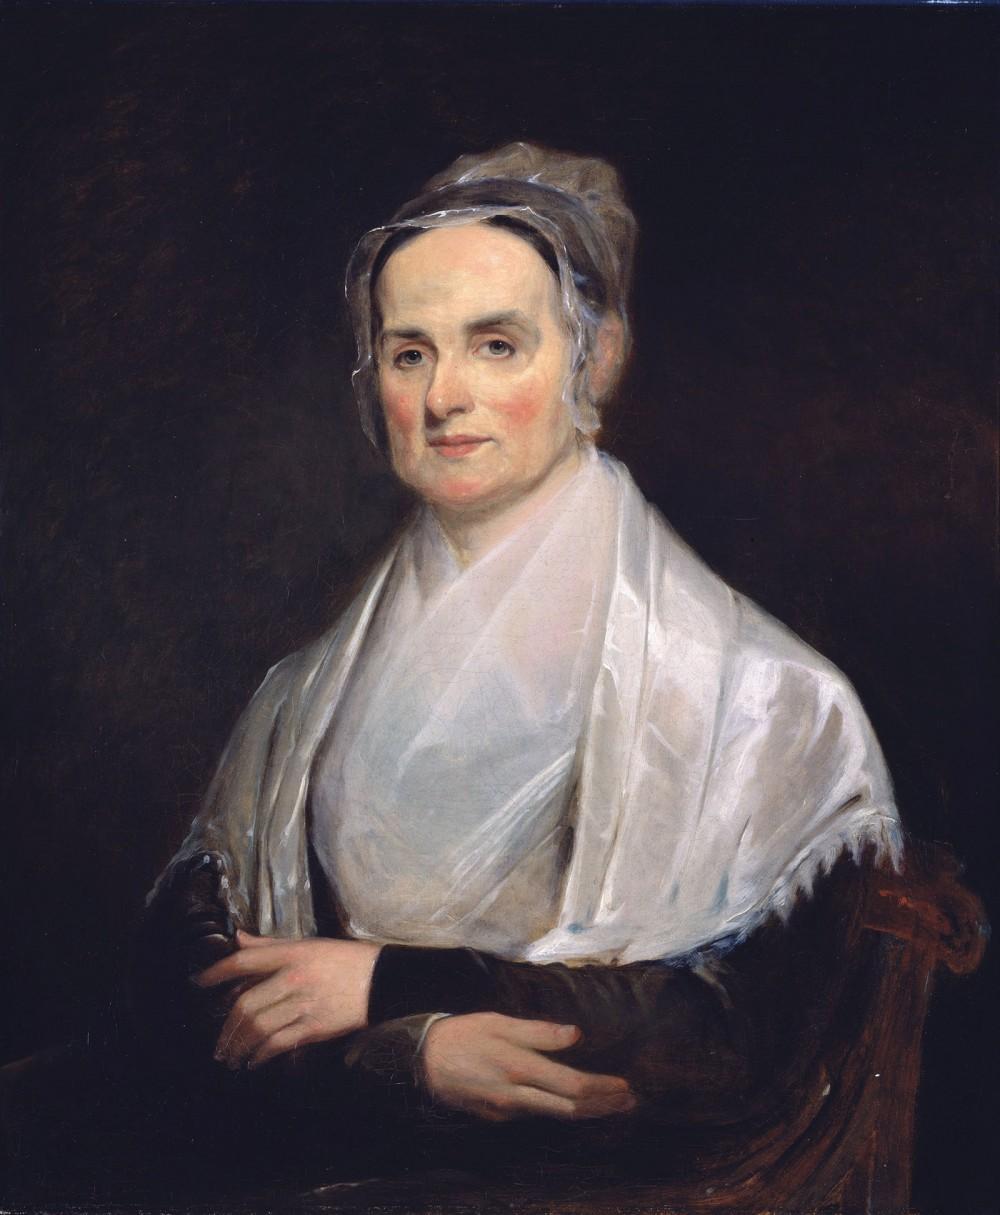 Lucretia Mott campaigned for women s rights, abolition, and equality in the United States. Joseph Kyle (artist), Lucretia Mott, 1842. Wikimedia, http://commons.wikimedia.